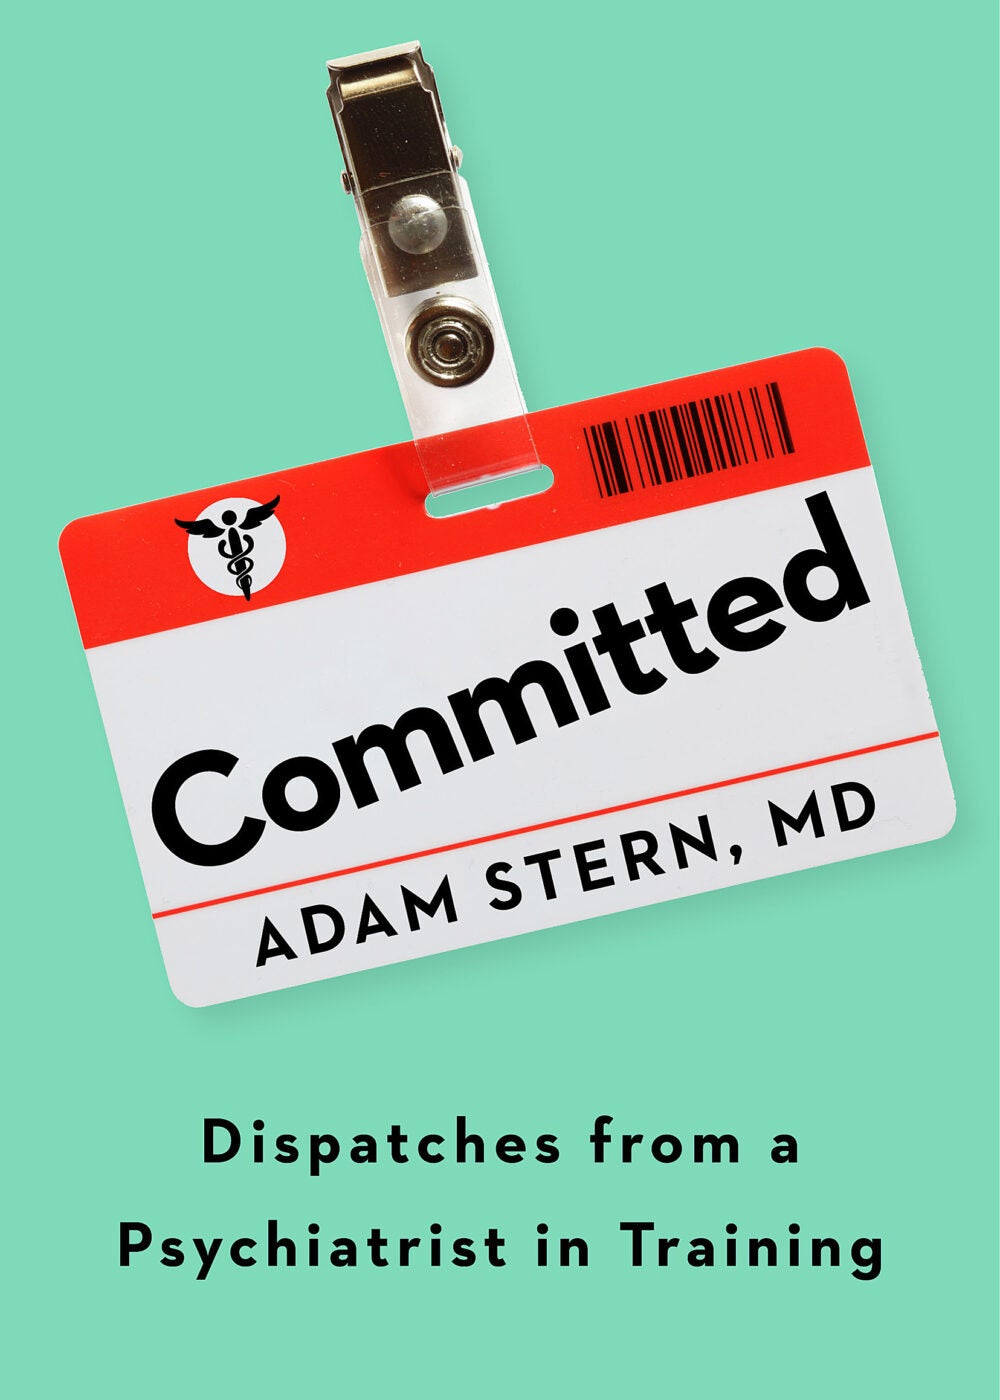 "Committed" book cover.